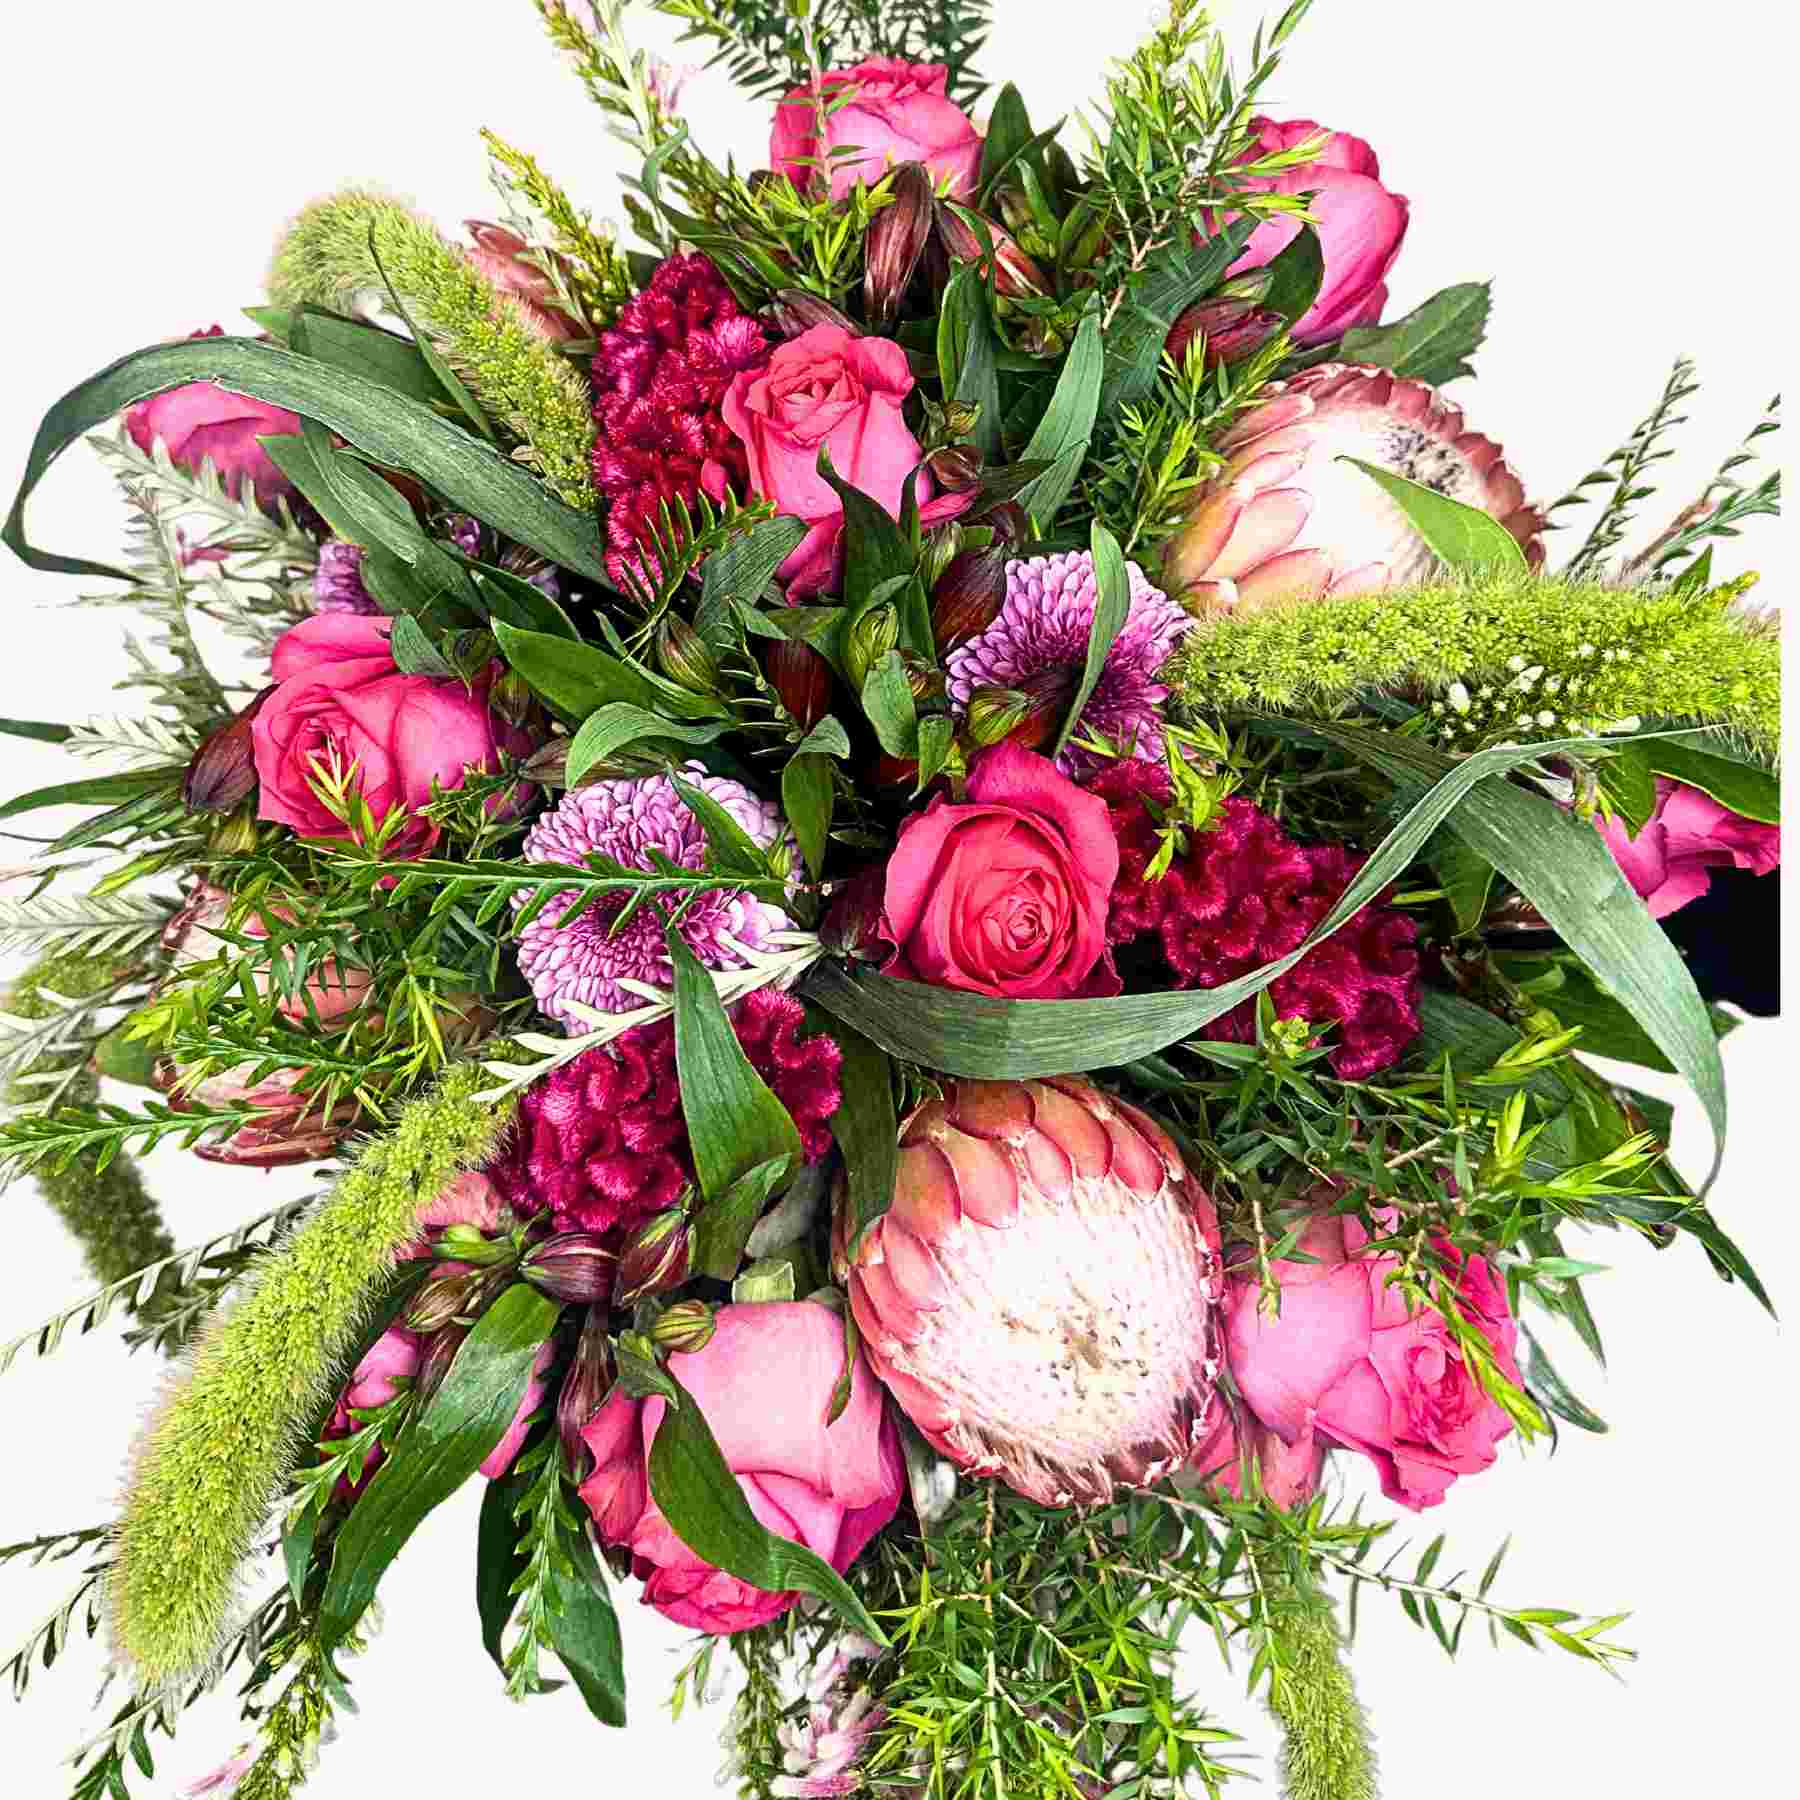 Lily, our happy florist presents her Lily's Flower Bouquet, a vibrant and lush arrangement of pink flowers and greenery, showcasing the quality and beauty offered by Fabulous Flowers and Gifts.